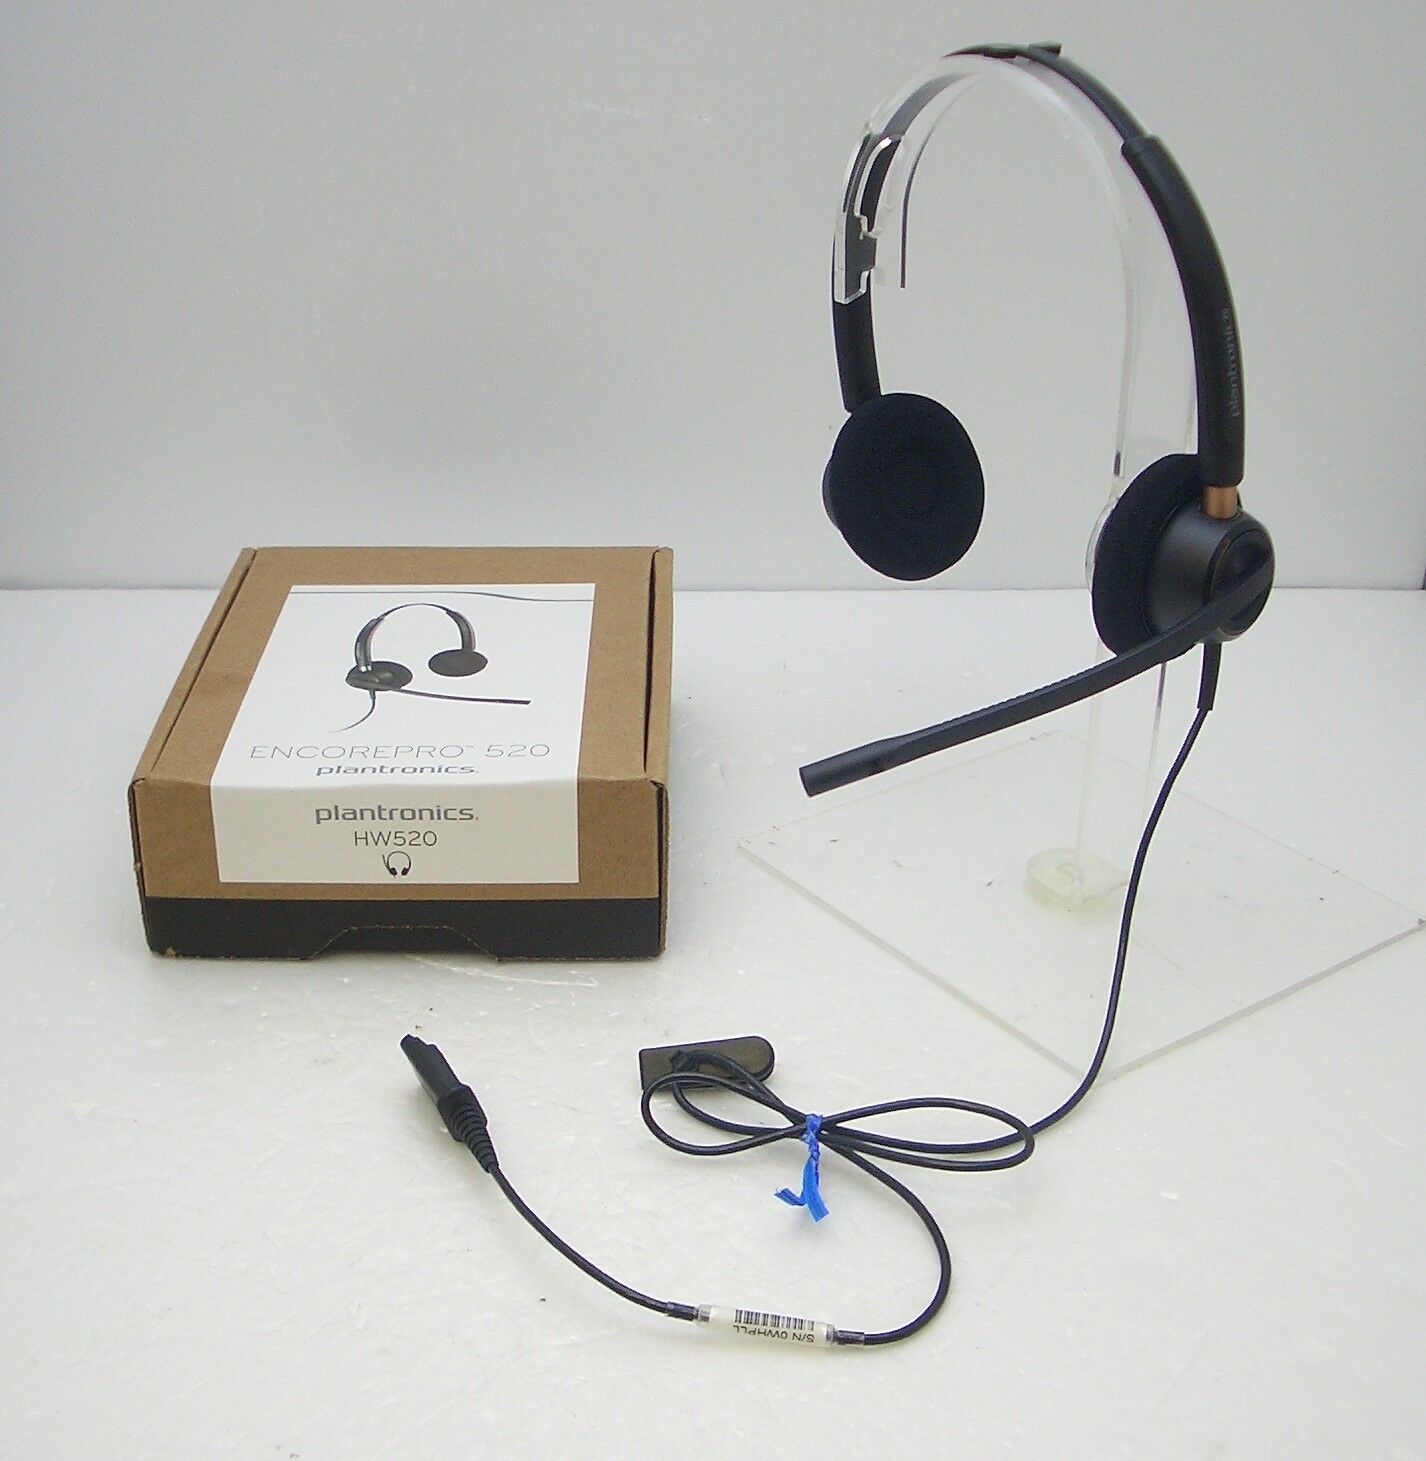 Encorepro hw520 headset 8943401 - WINPROMY CONSULTANCY SDN BHD. (1065242-V) All Rights Reserved.